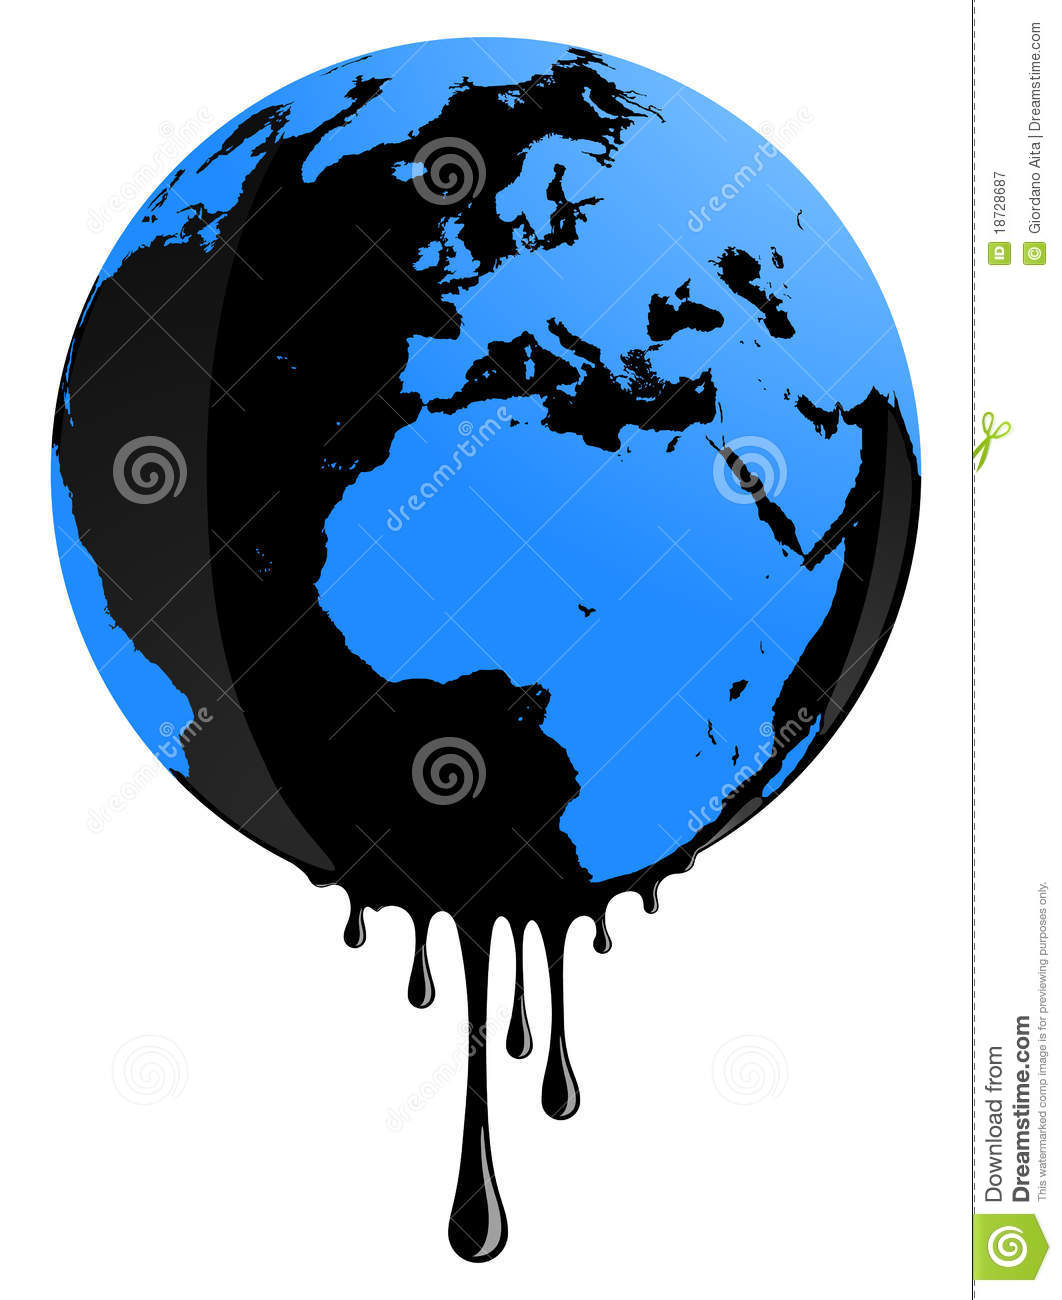 Earth Oil Pollution Royalty Free Stock Photography   Image  18728687